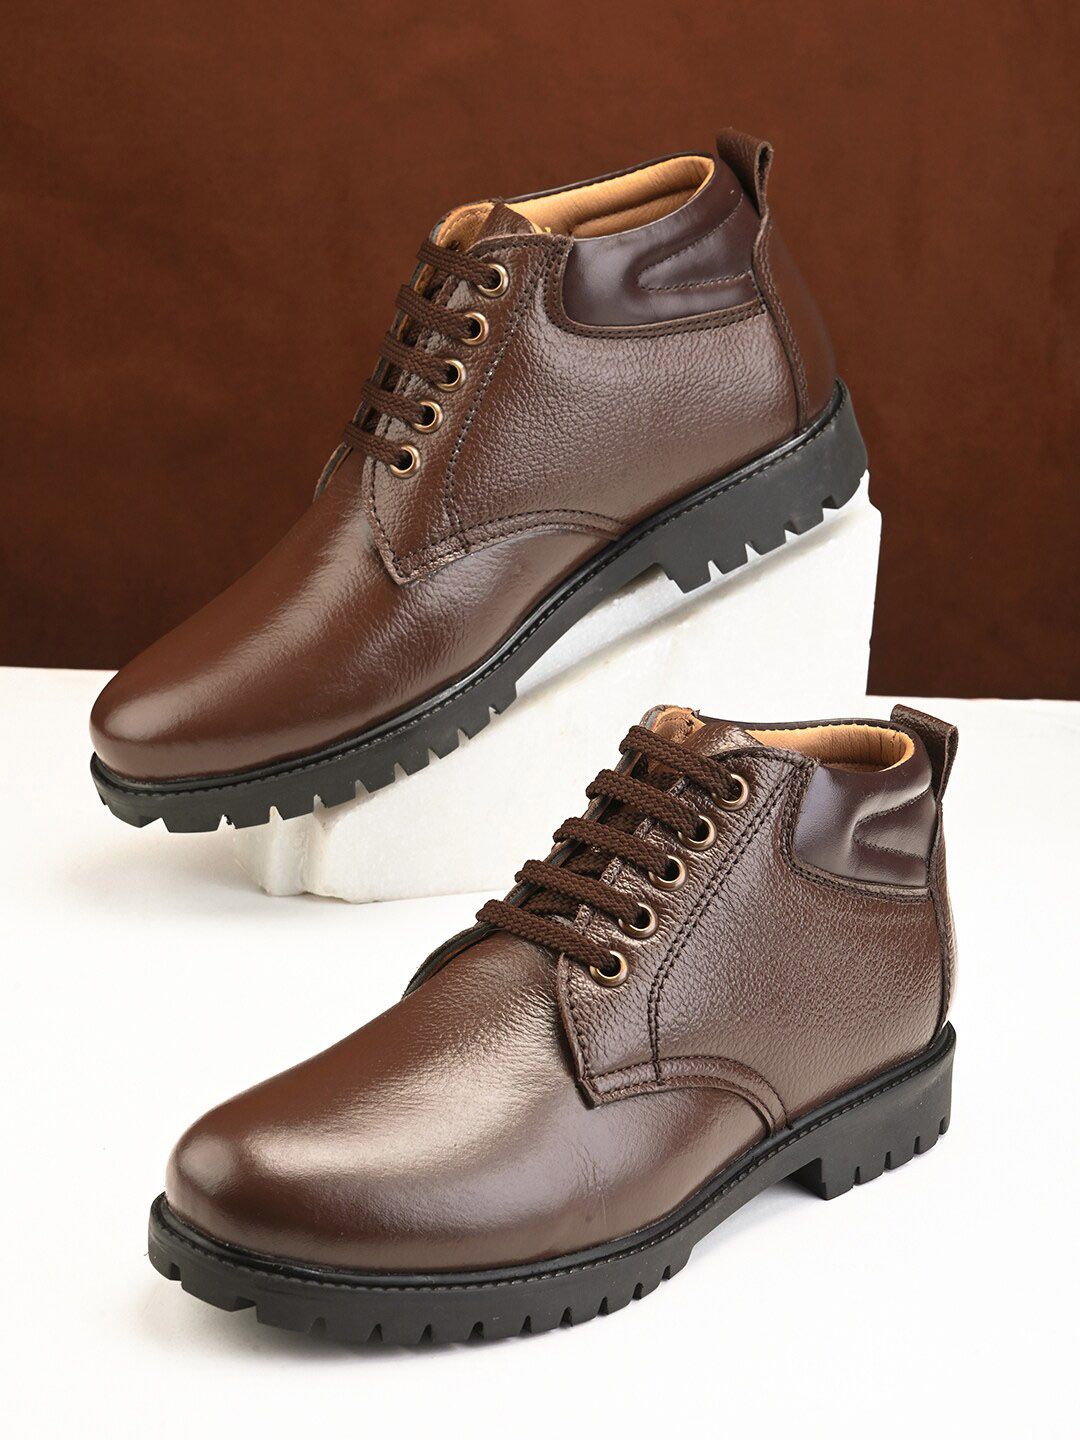 The Roadster Lifestyle Co. Men Leather Mid Top Regular Boots